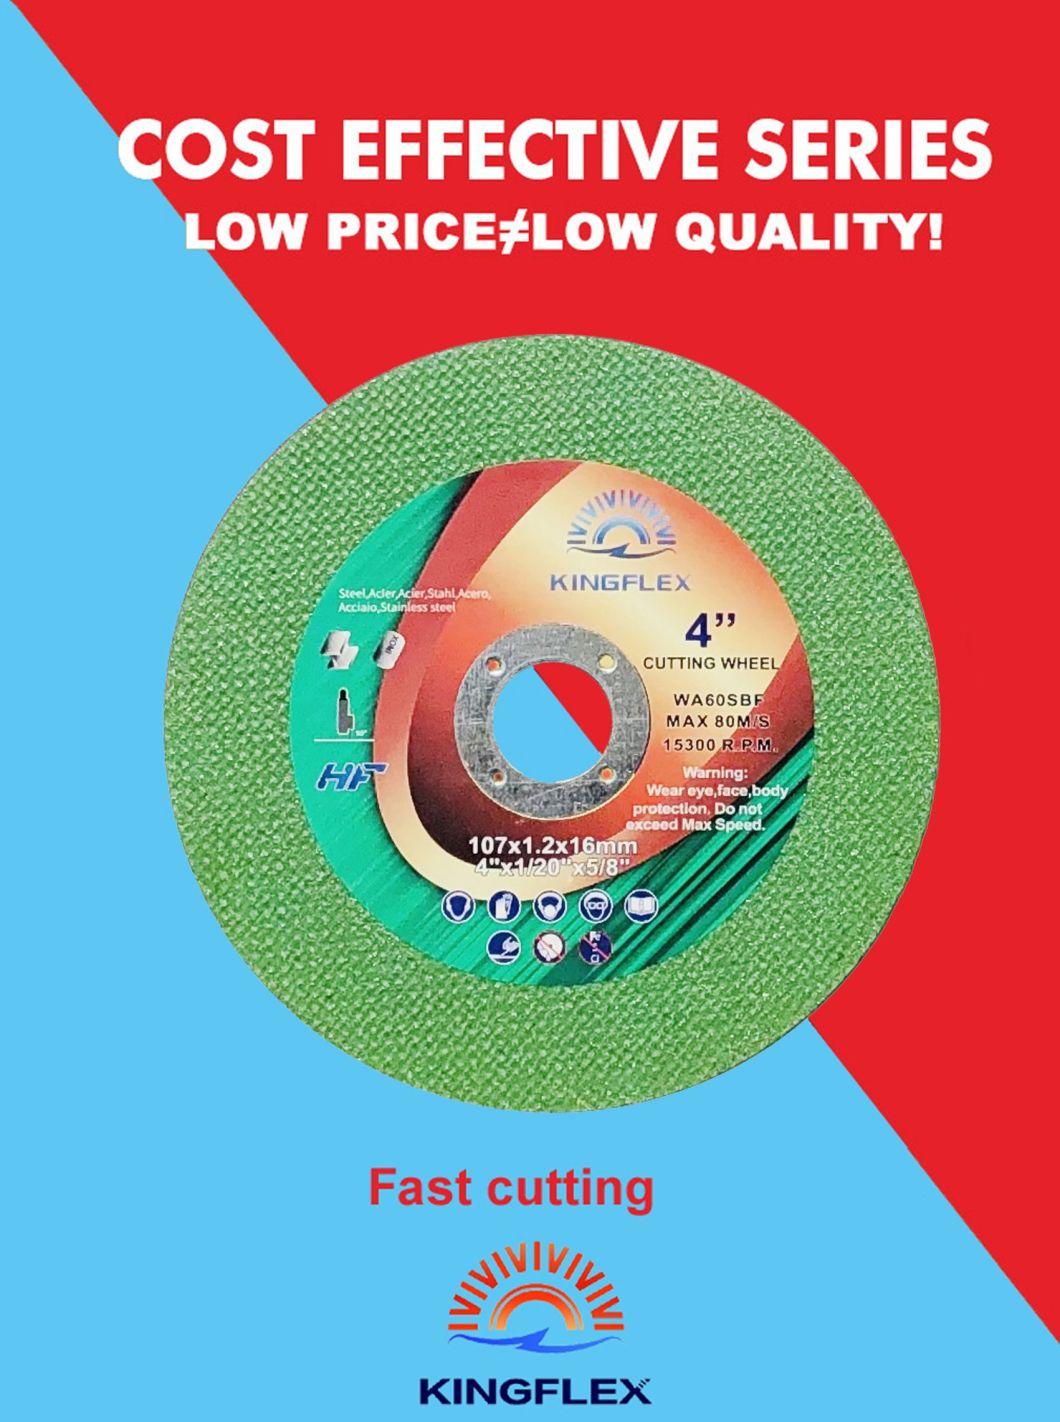 Super Thin Cutting Disc, 4X1, 1net Black, Special for Inox and Stainless Steel